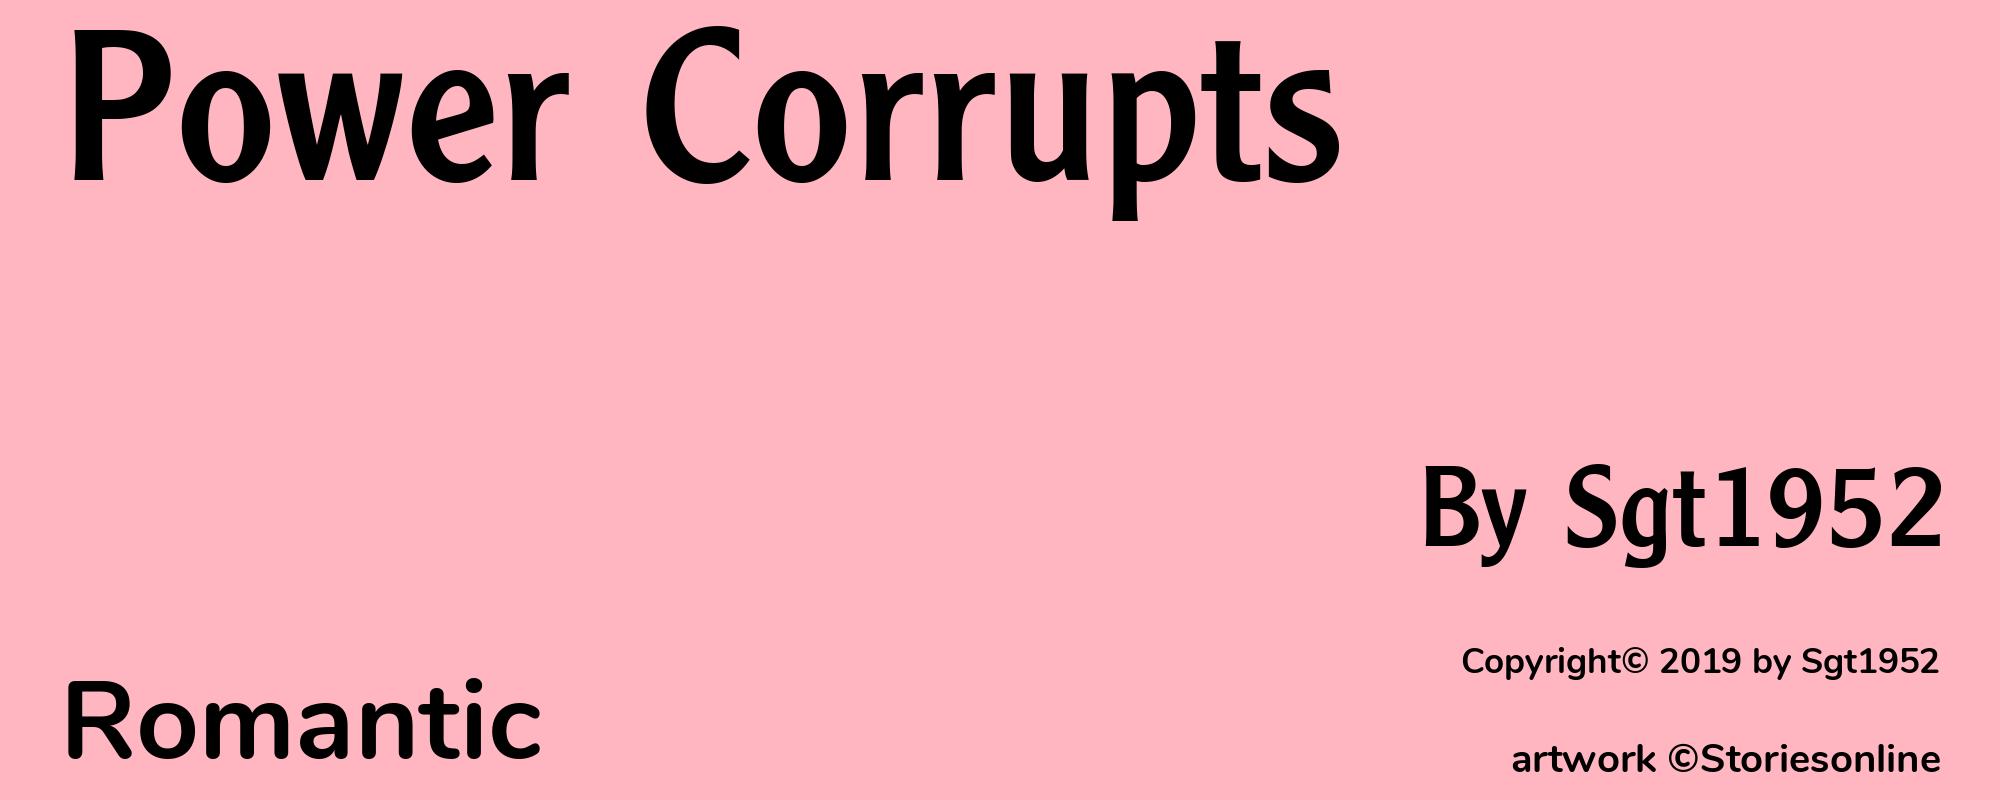 Power Corrupts - Cover